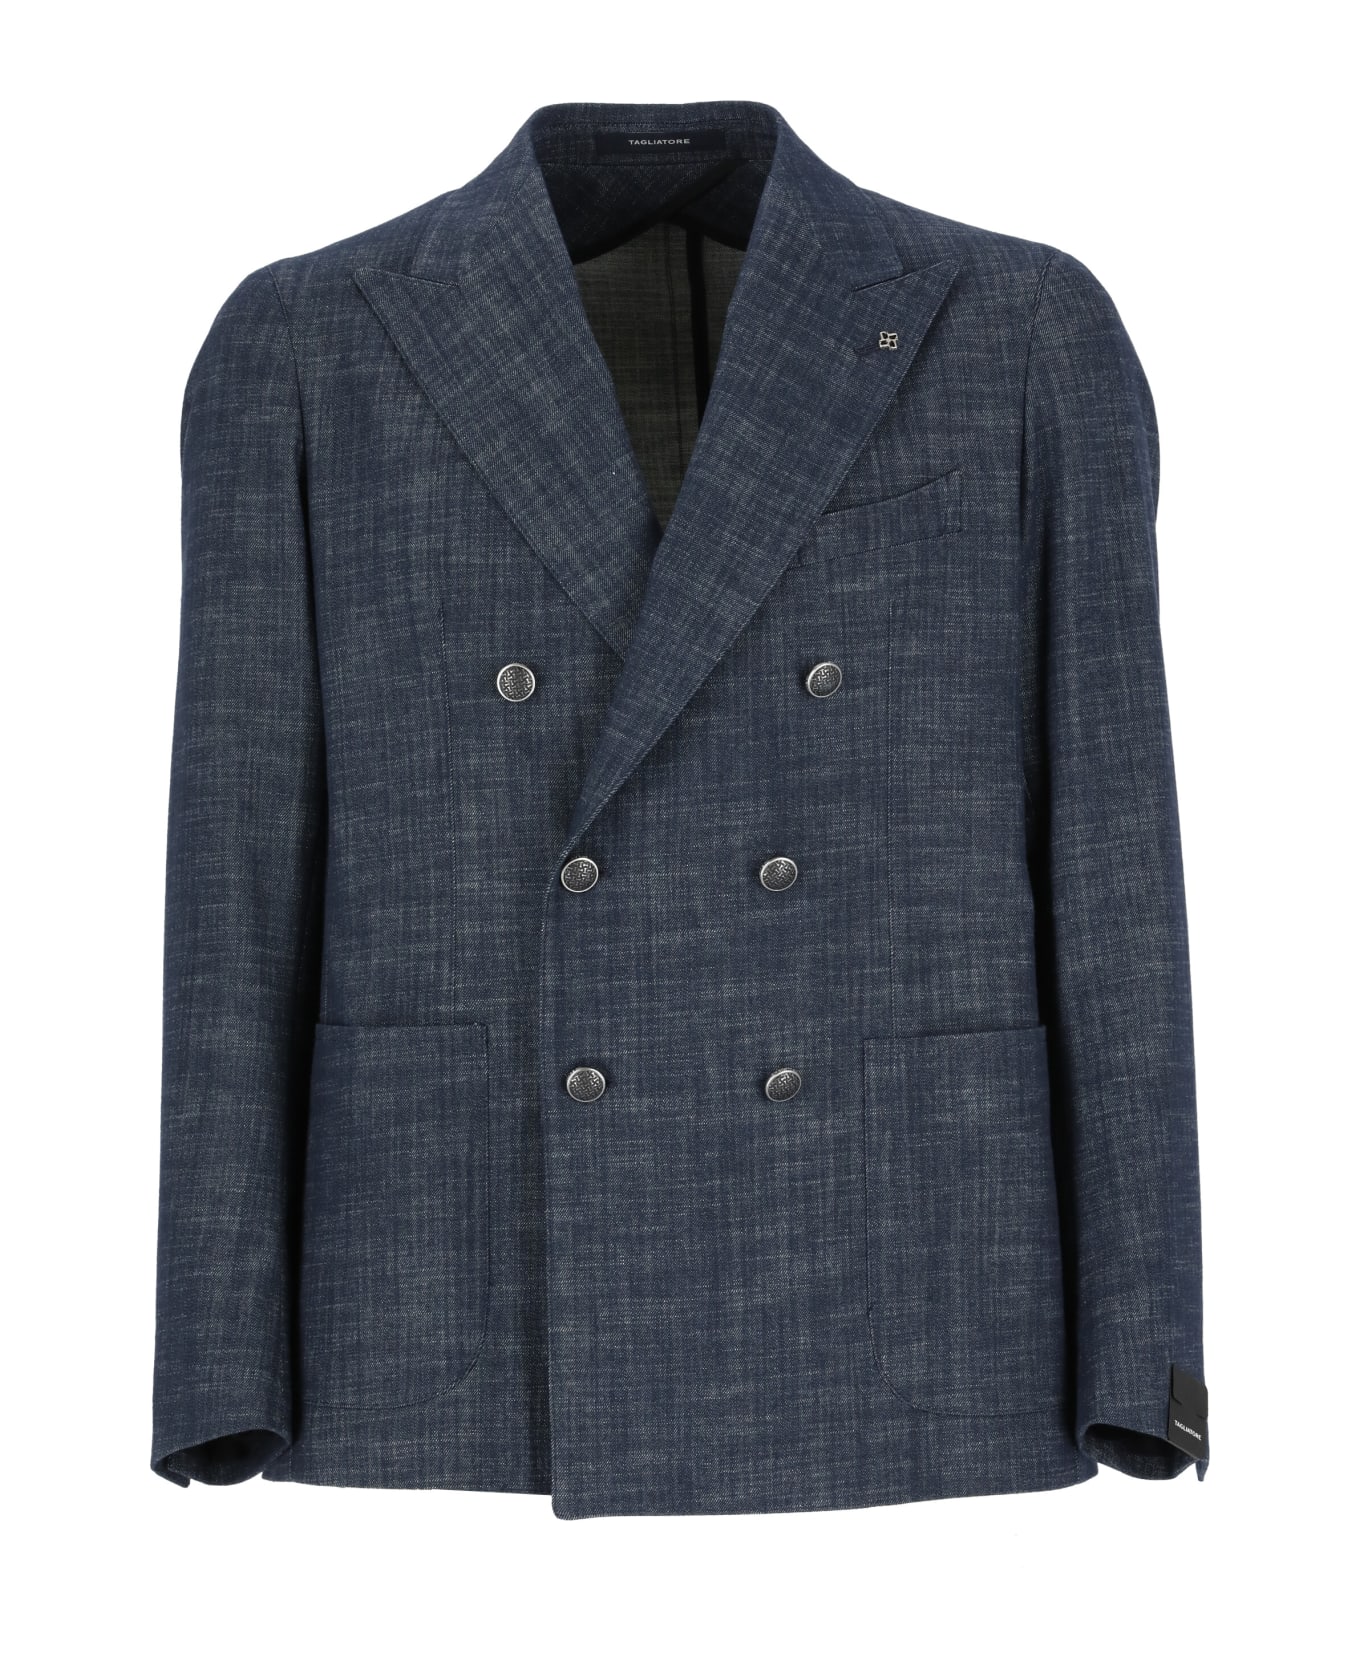 Tagliatore Double Breasted Cotton Jacket - Blue